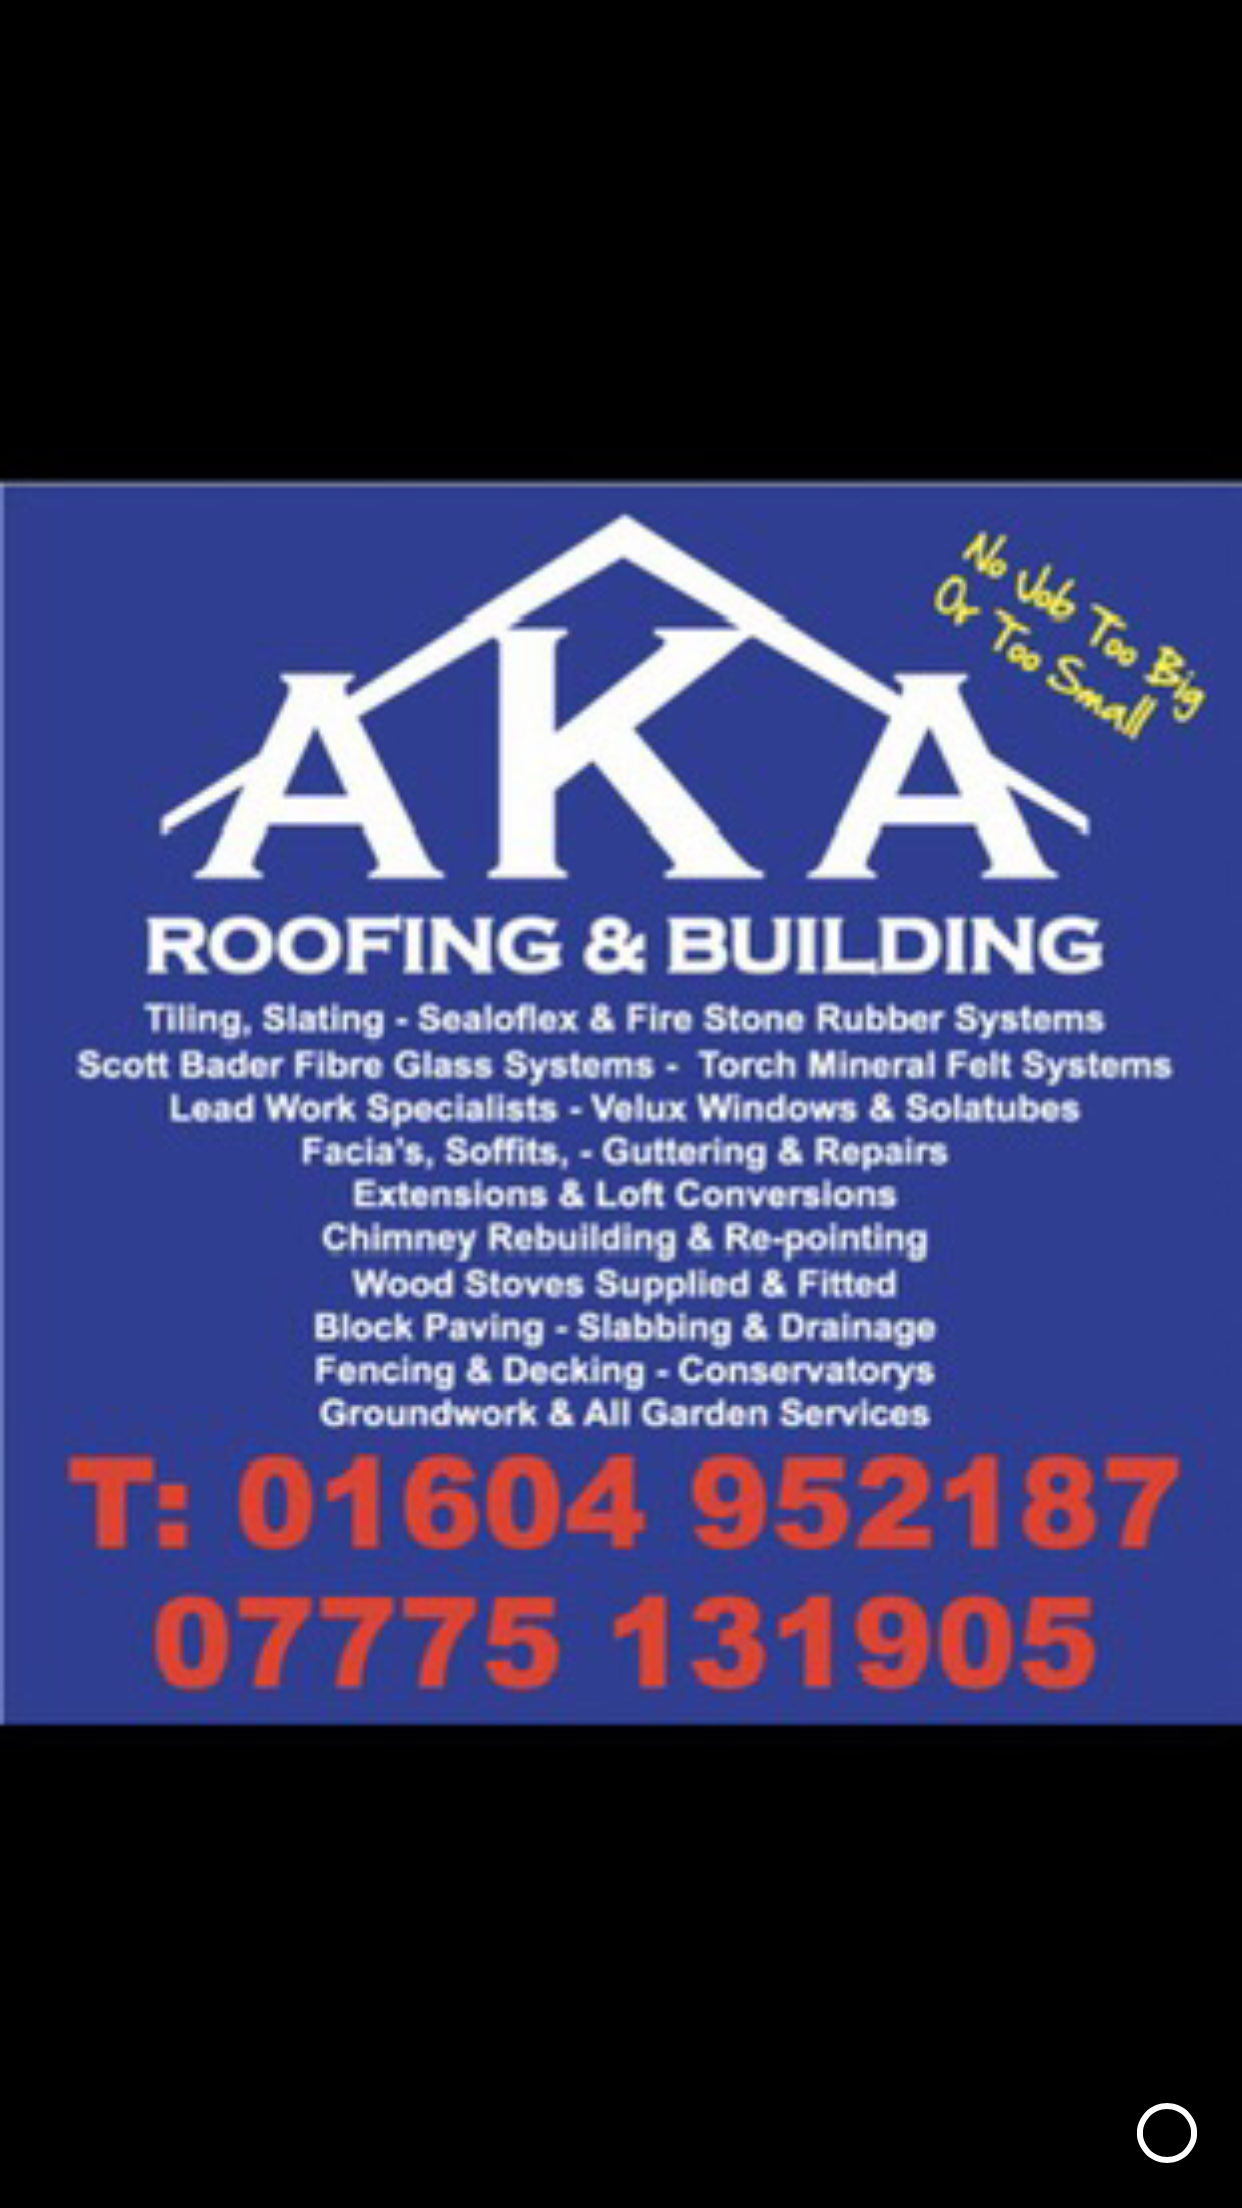 Aka roofing and building